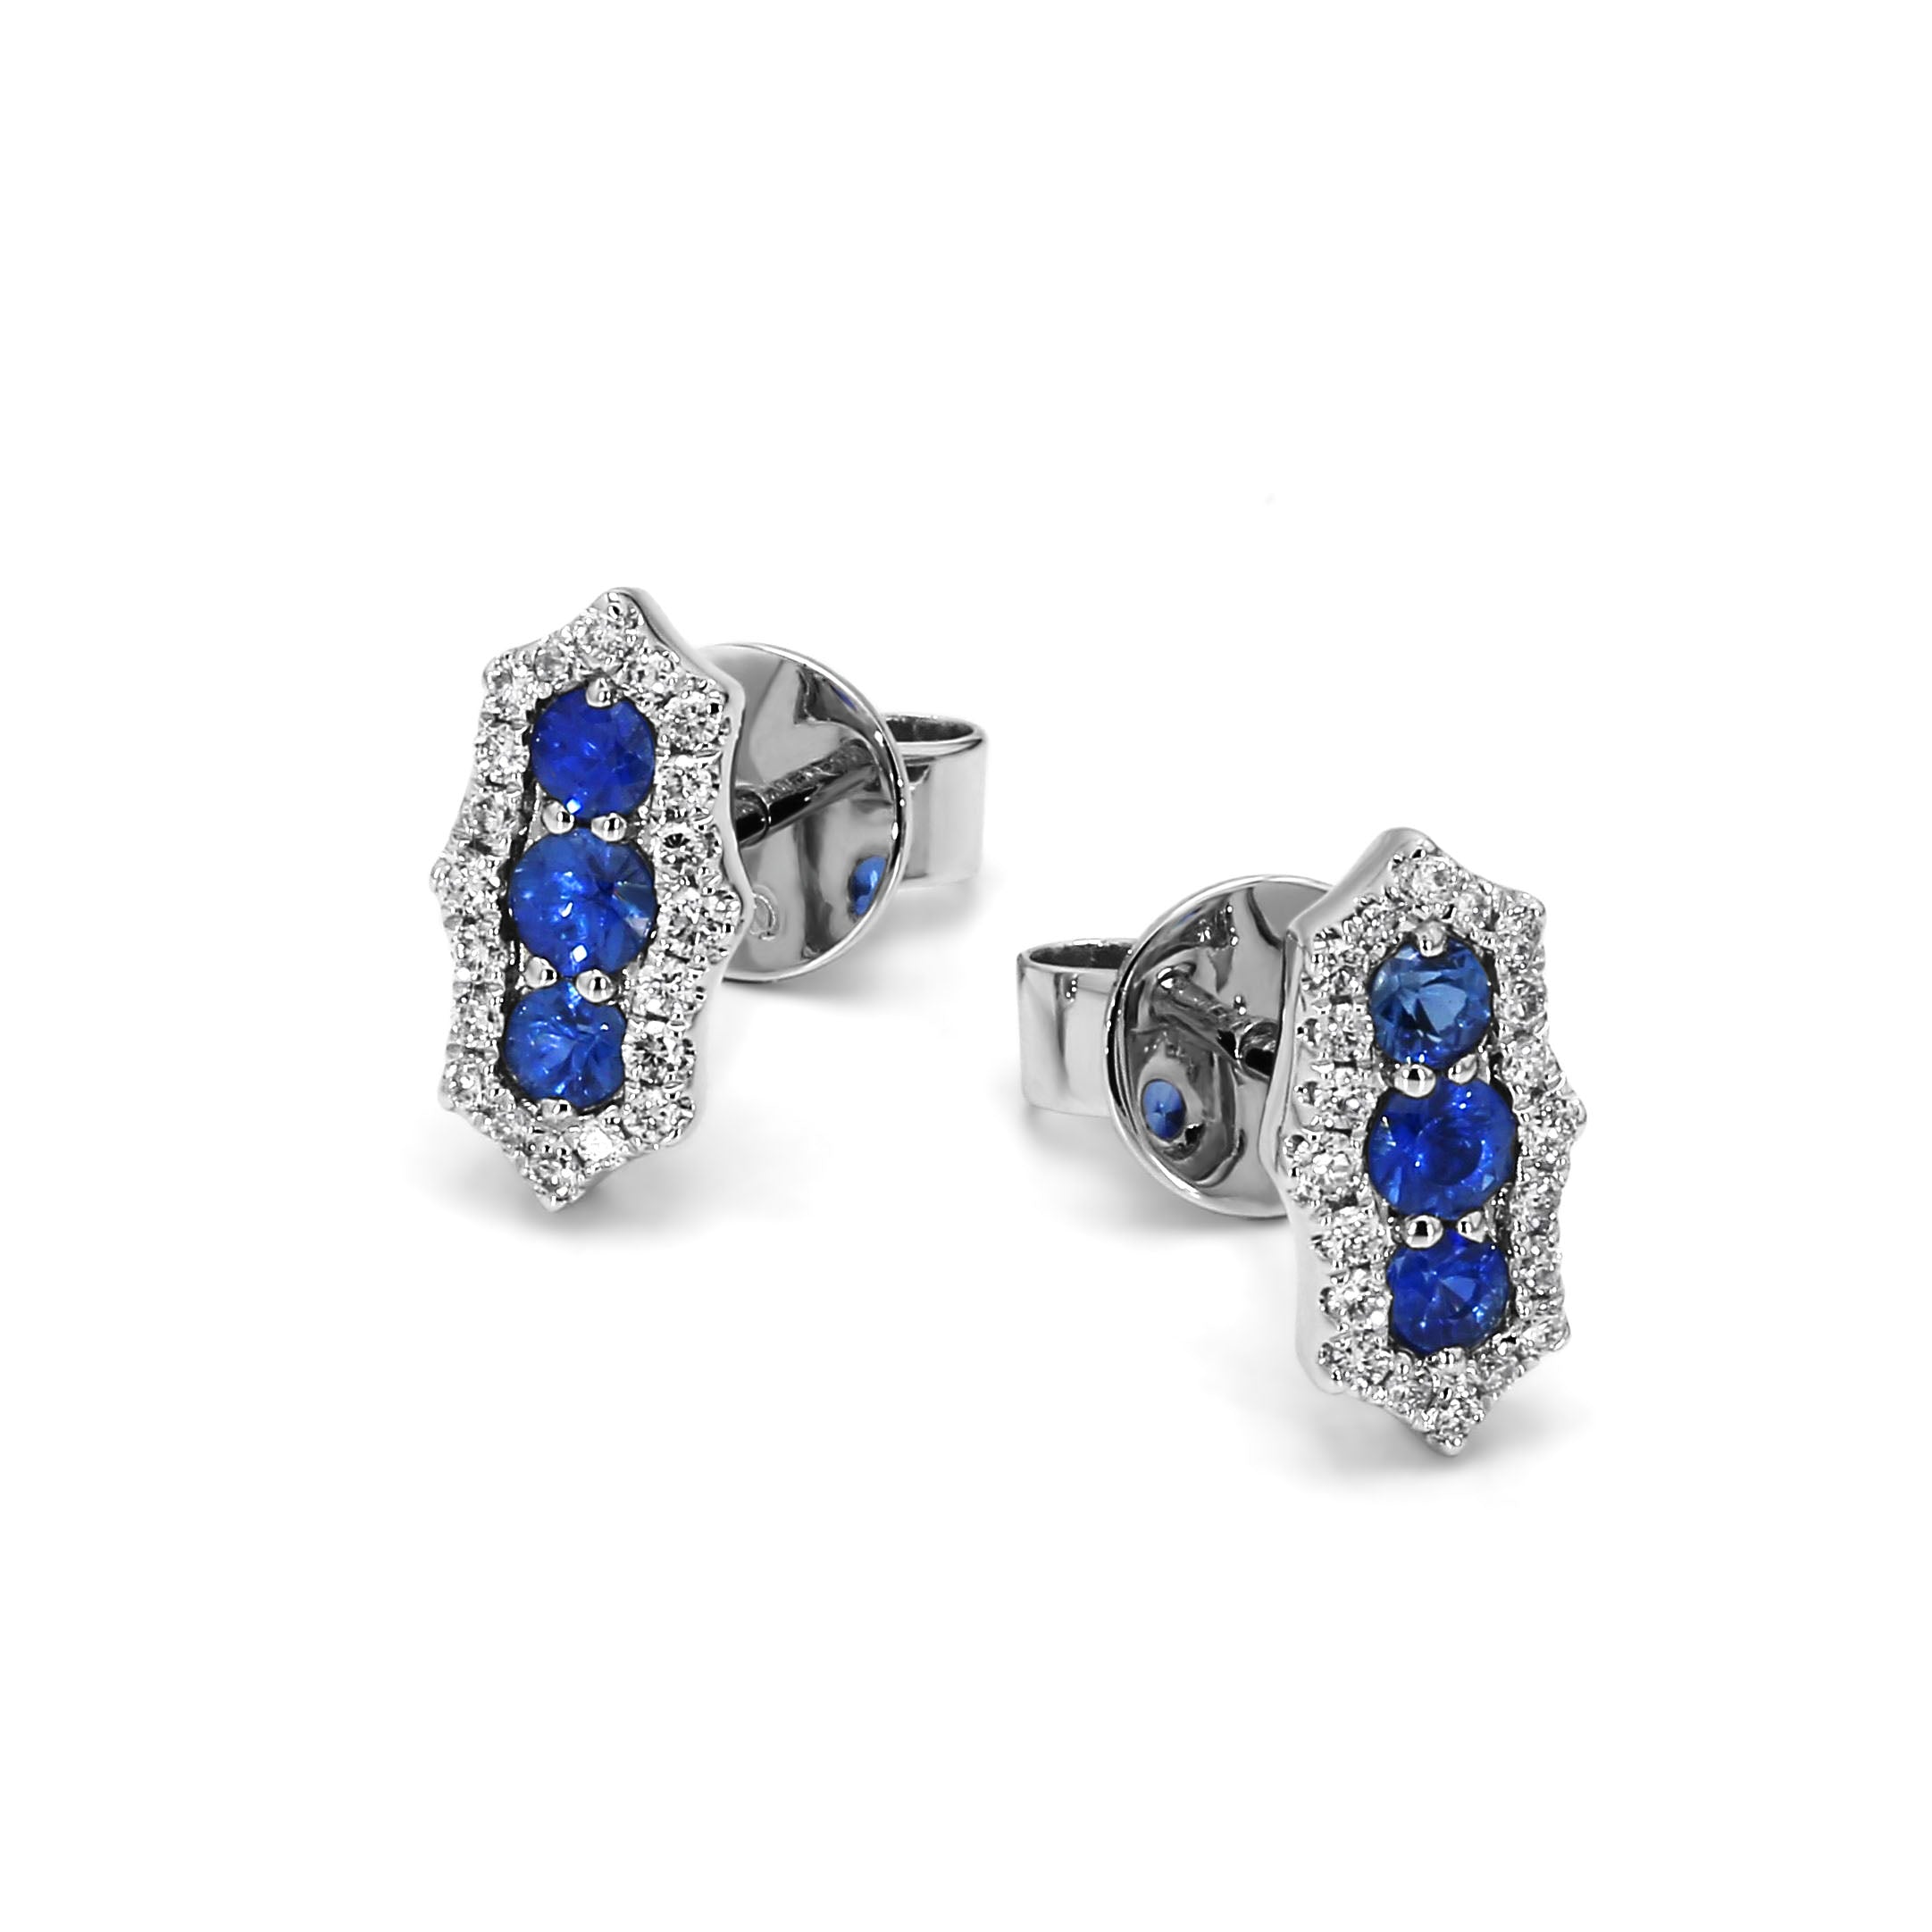 Adamar Jewels CREENCIA Siempre Earrings in 18K white gold set with sapphire and diamonds